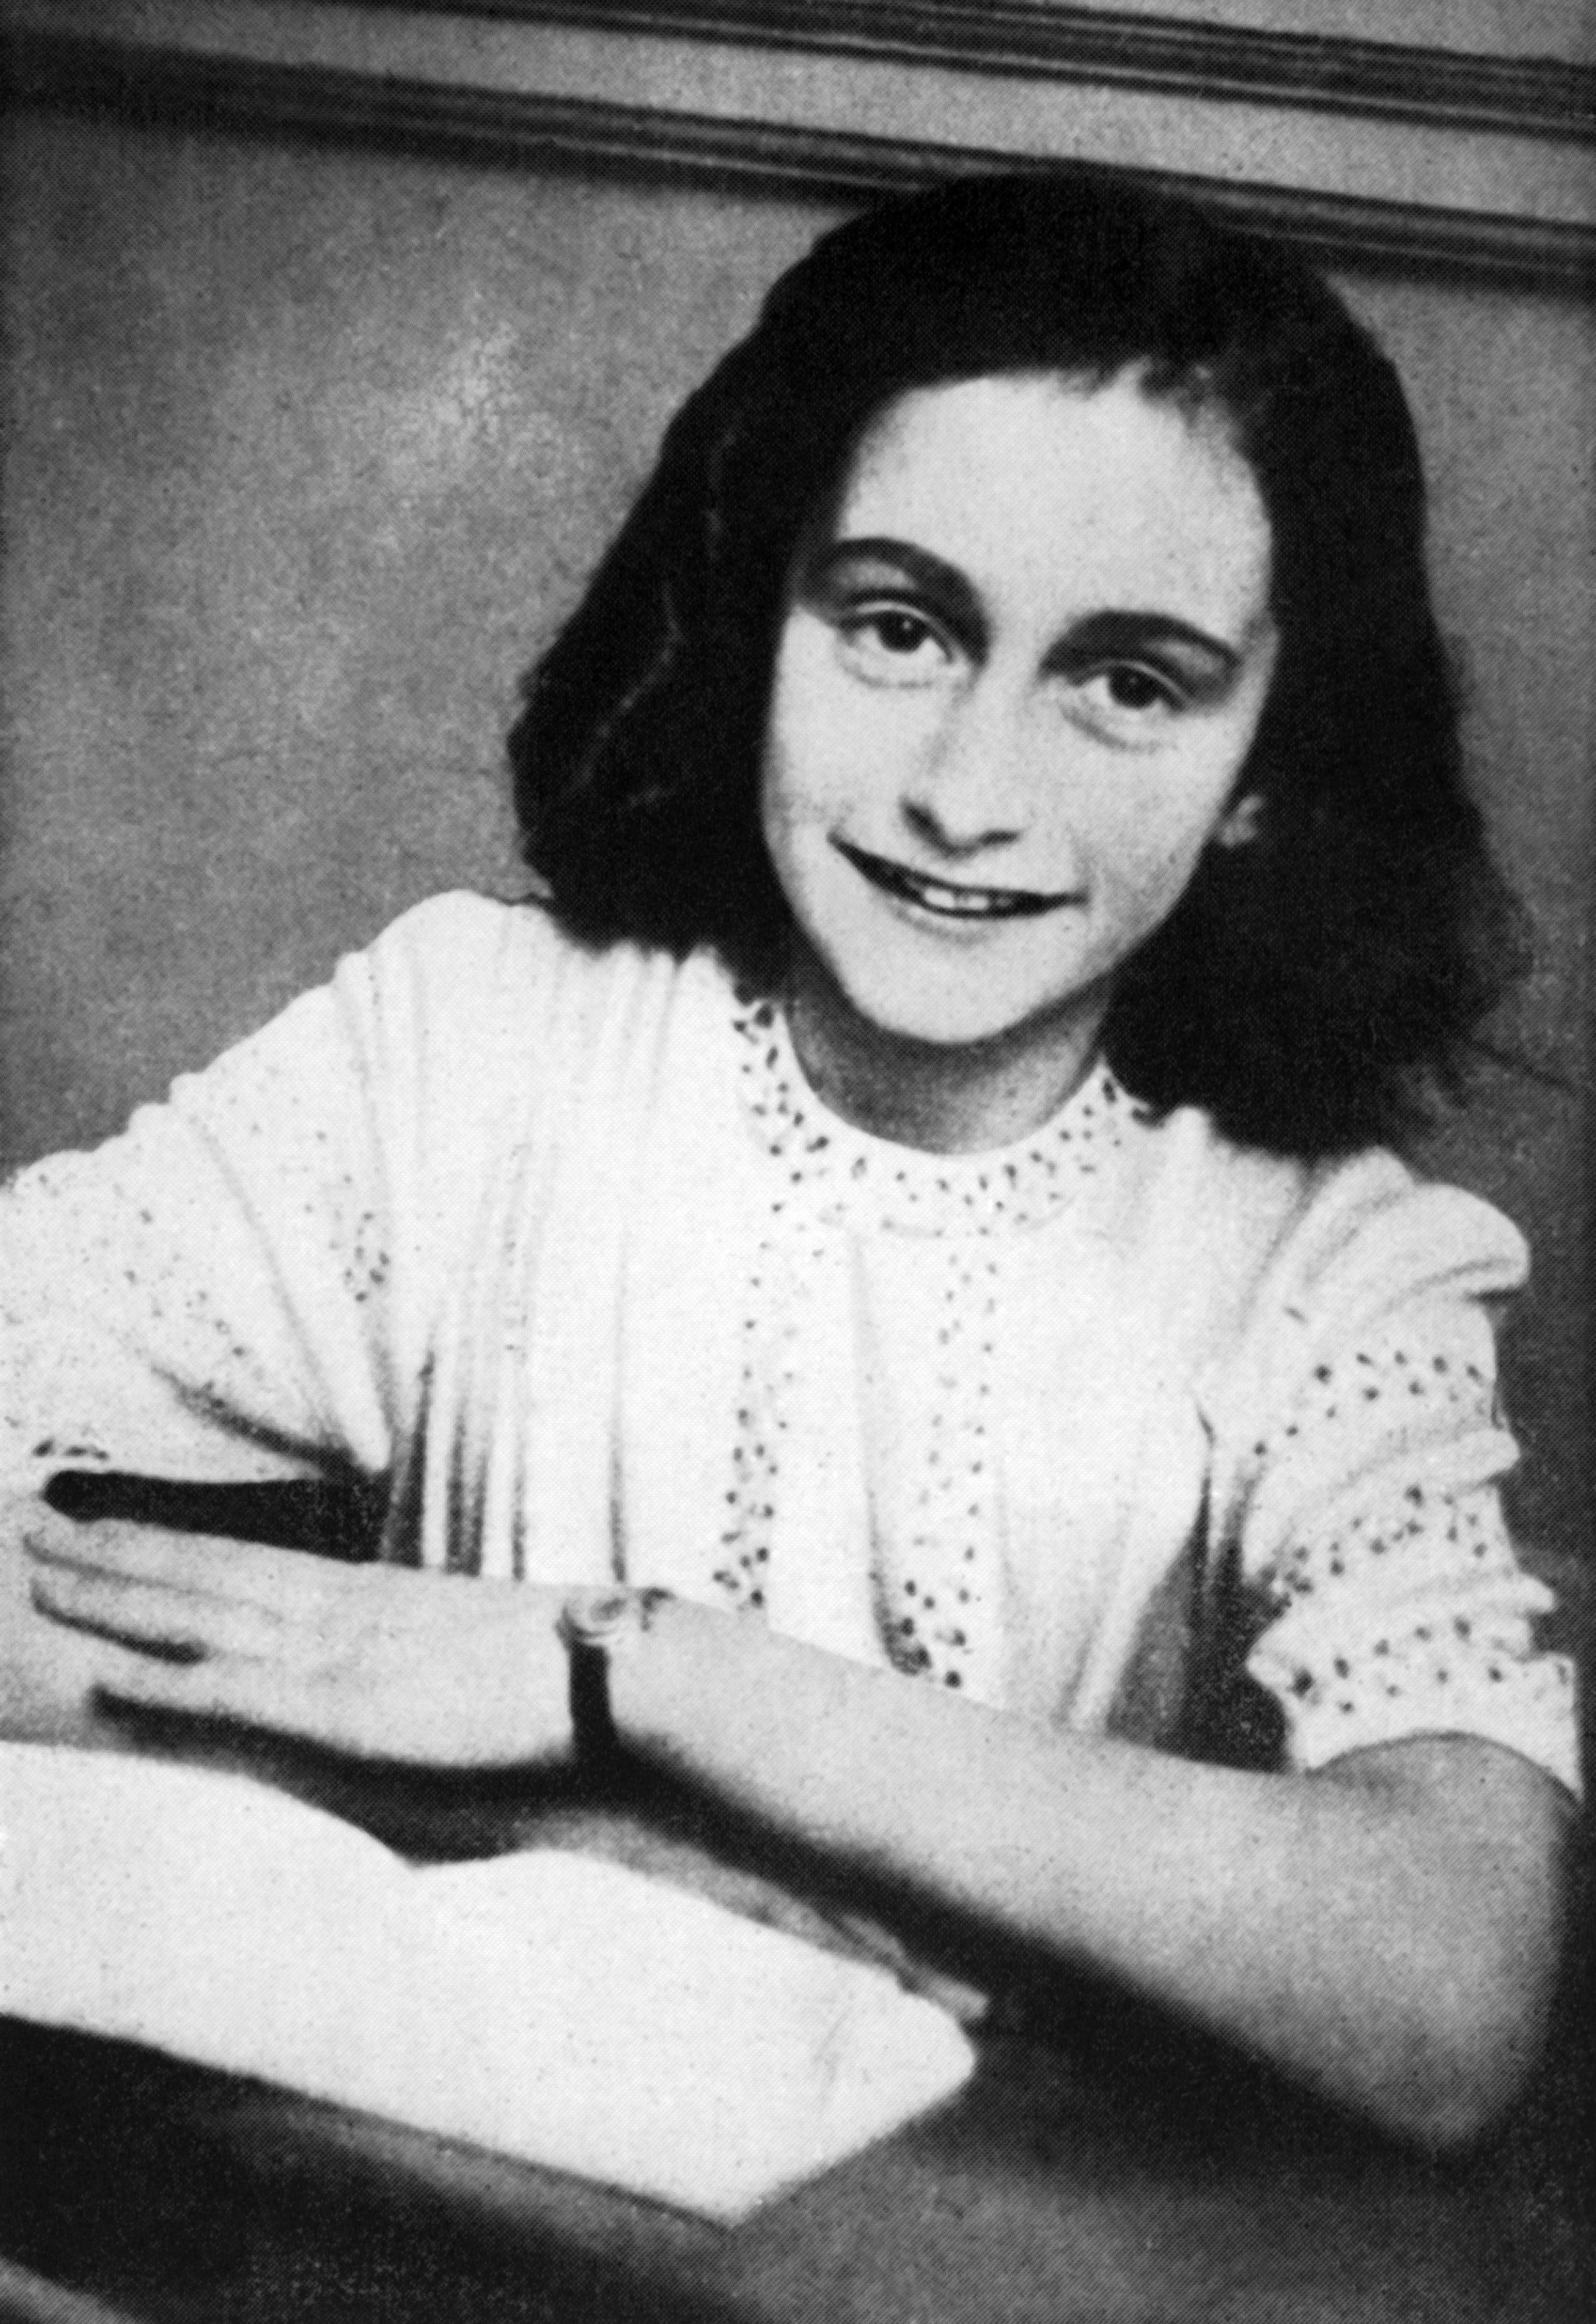 Researchers unearth link to Anne Frank at Sobibor site